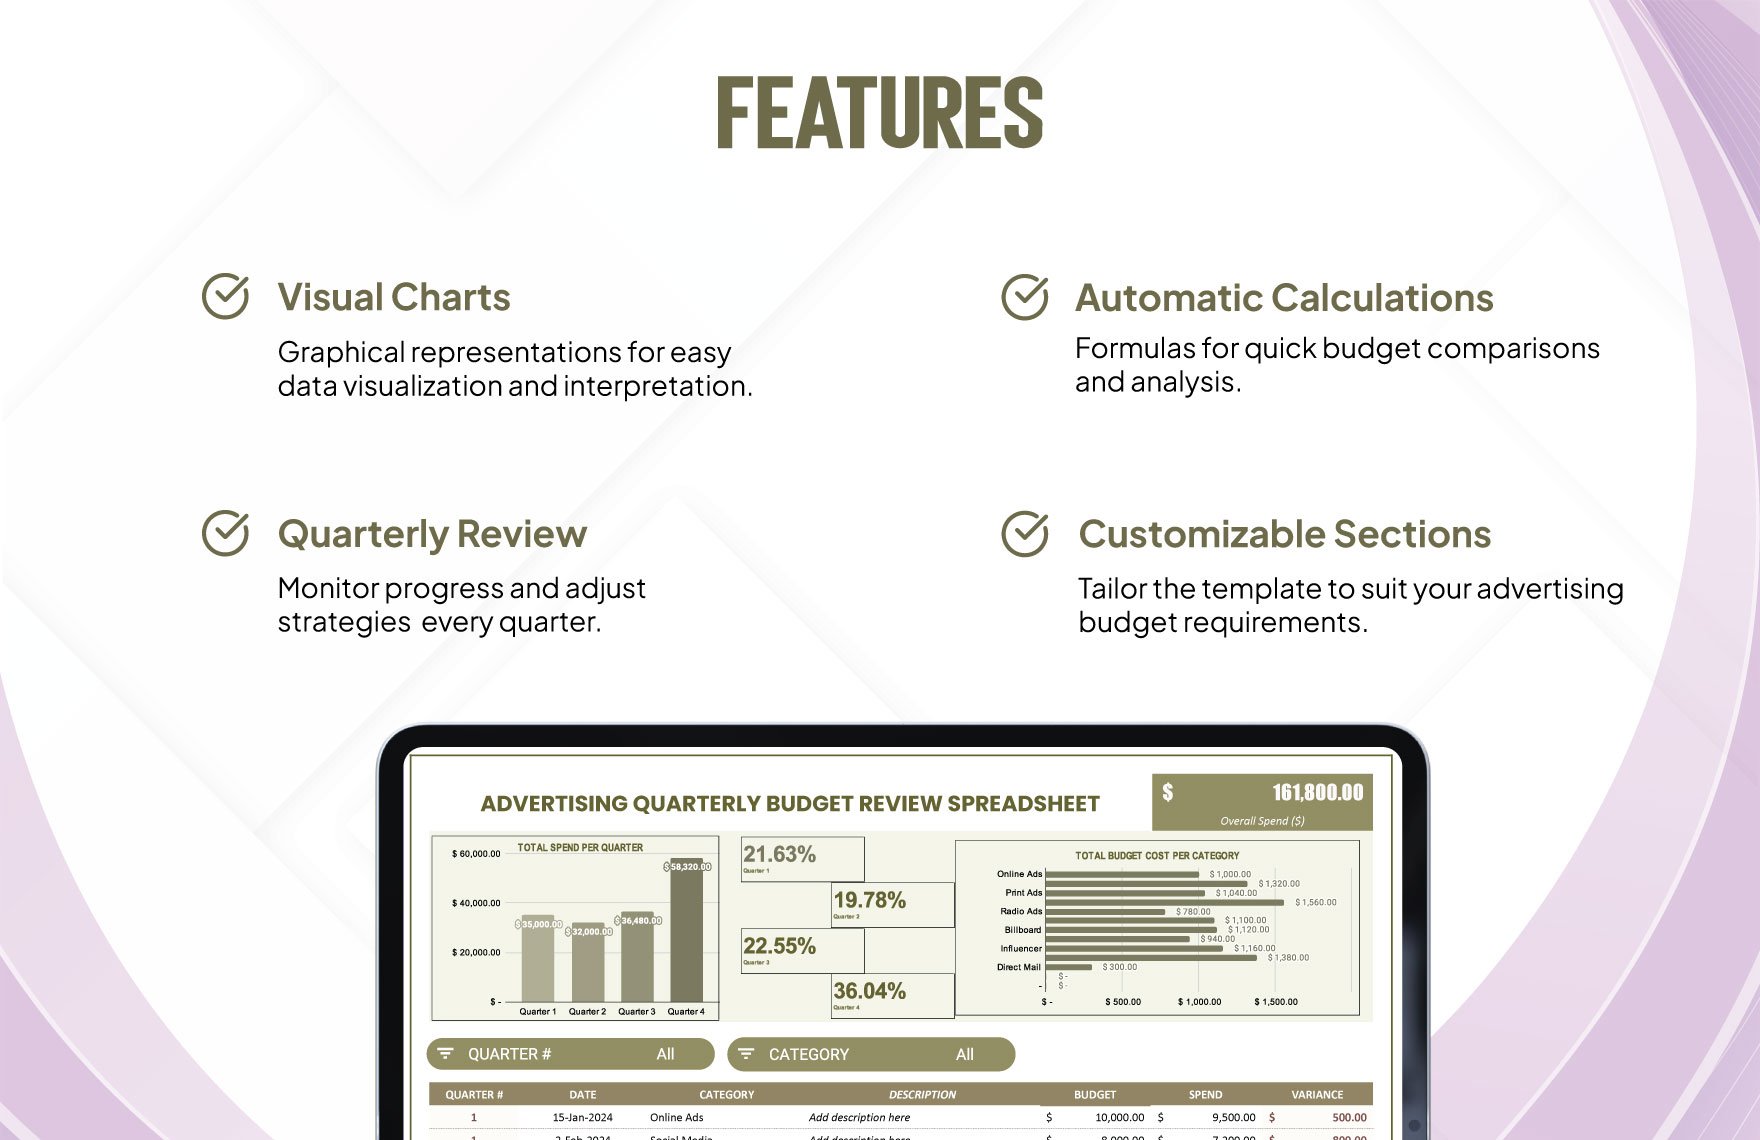 Advertising Quarterly Budget Review Spreadsheet Template